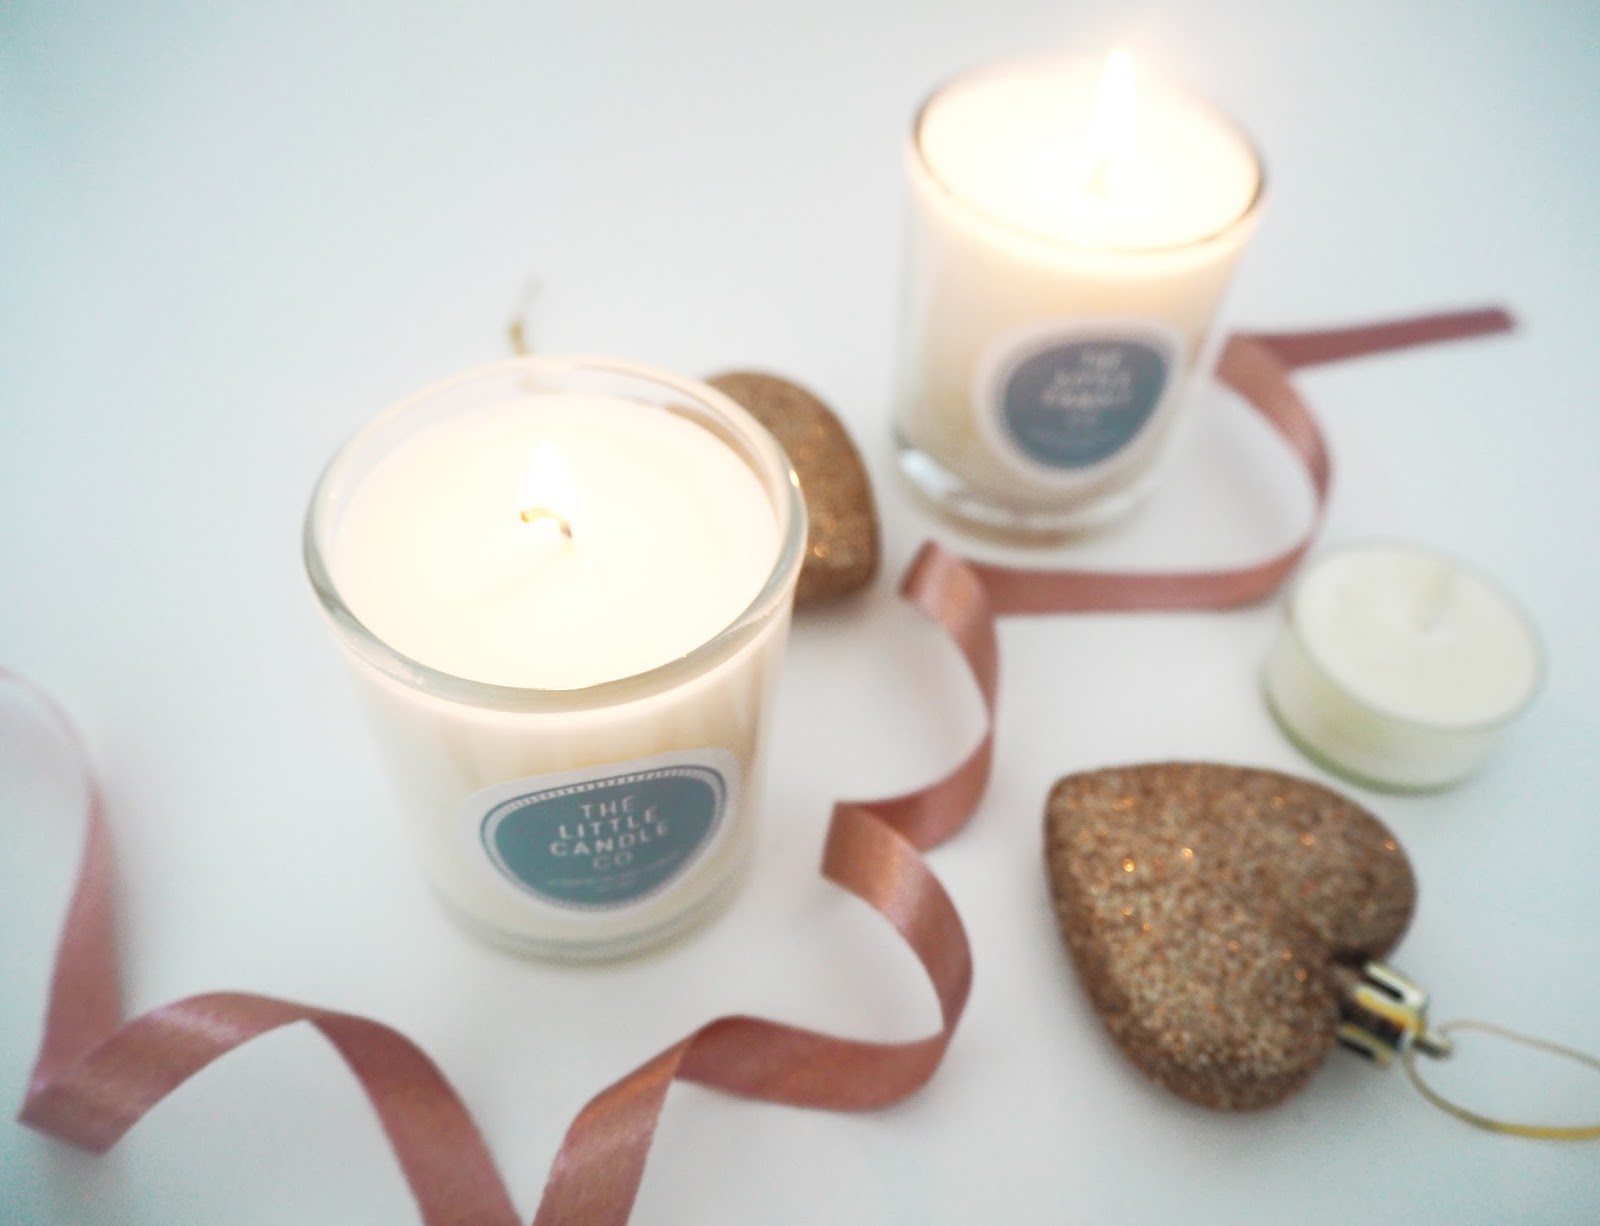 The Little Candle Co, Katie Kirk Loves, Candle Review, Handmade Candles, Handmade in the UK, Fragranced Candles, Handmade Gifts, UK Blogger, Candle Blogger, Lifestyle Blogger